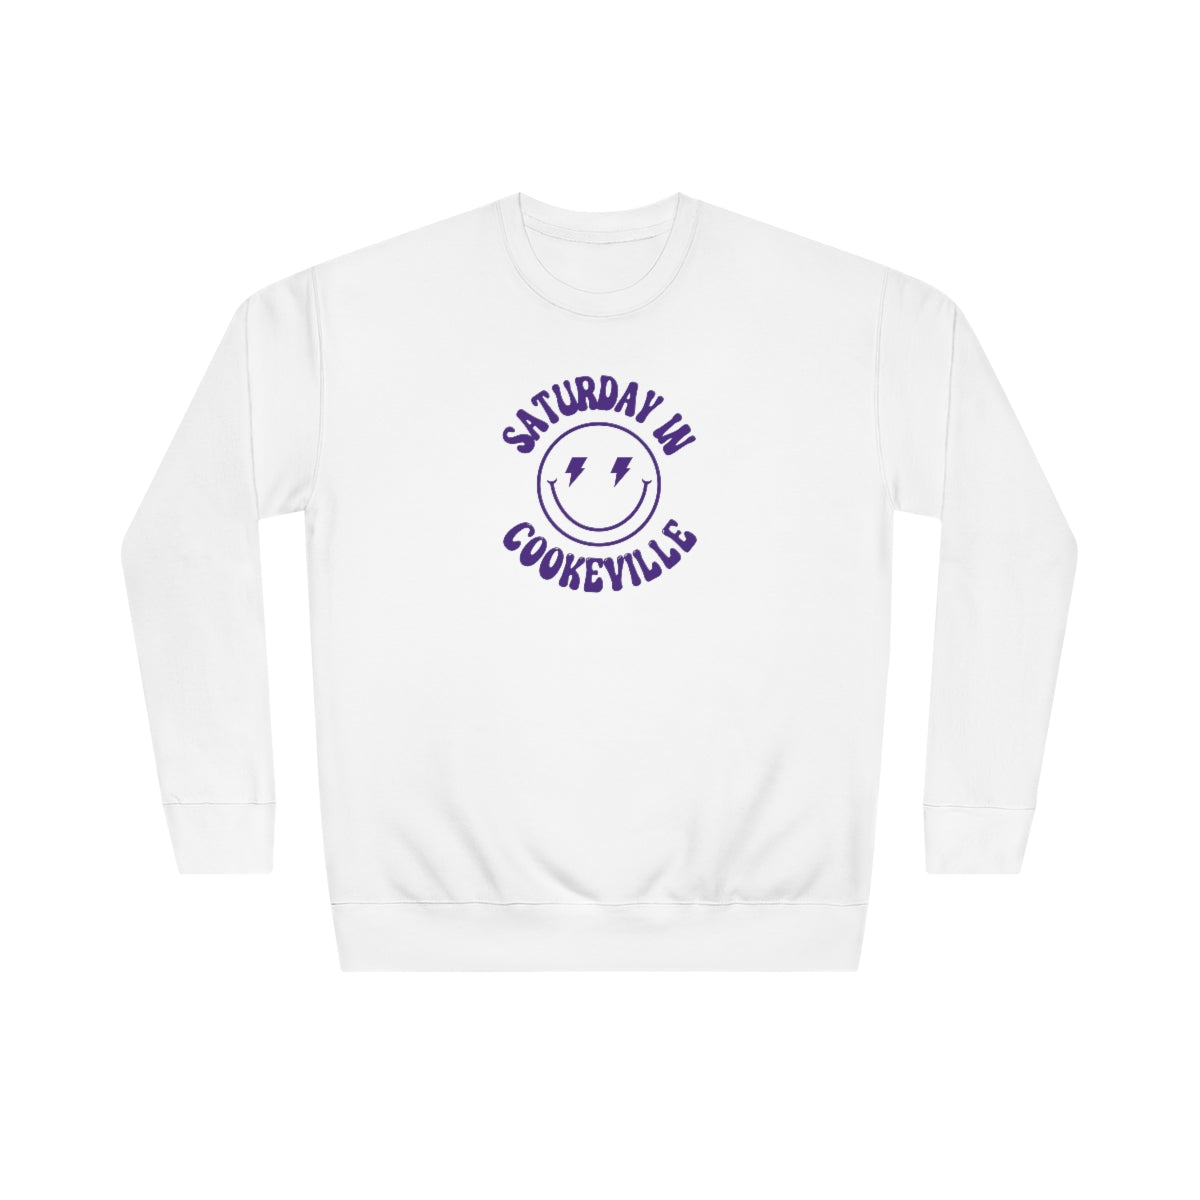 Smiley Cookeville Crew Sweatshirt - GG - CH